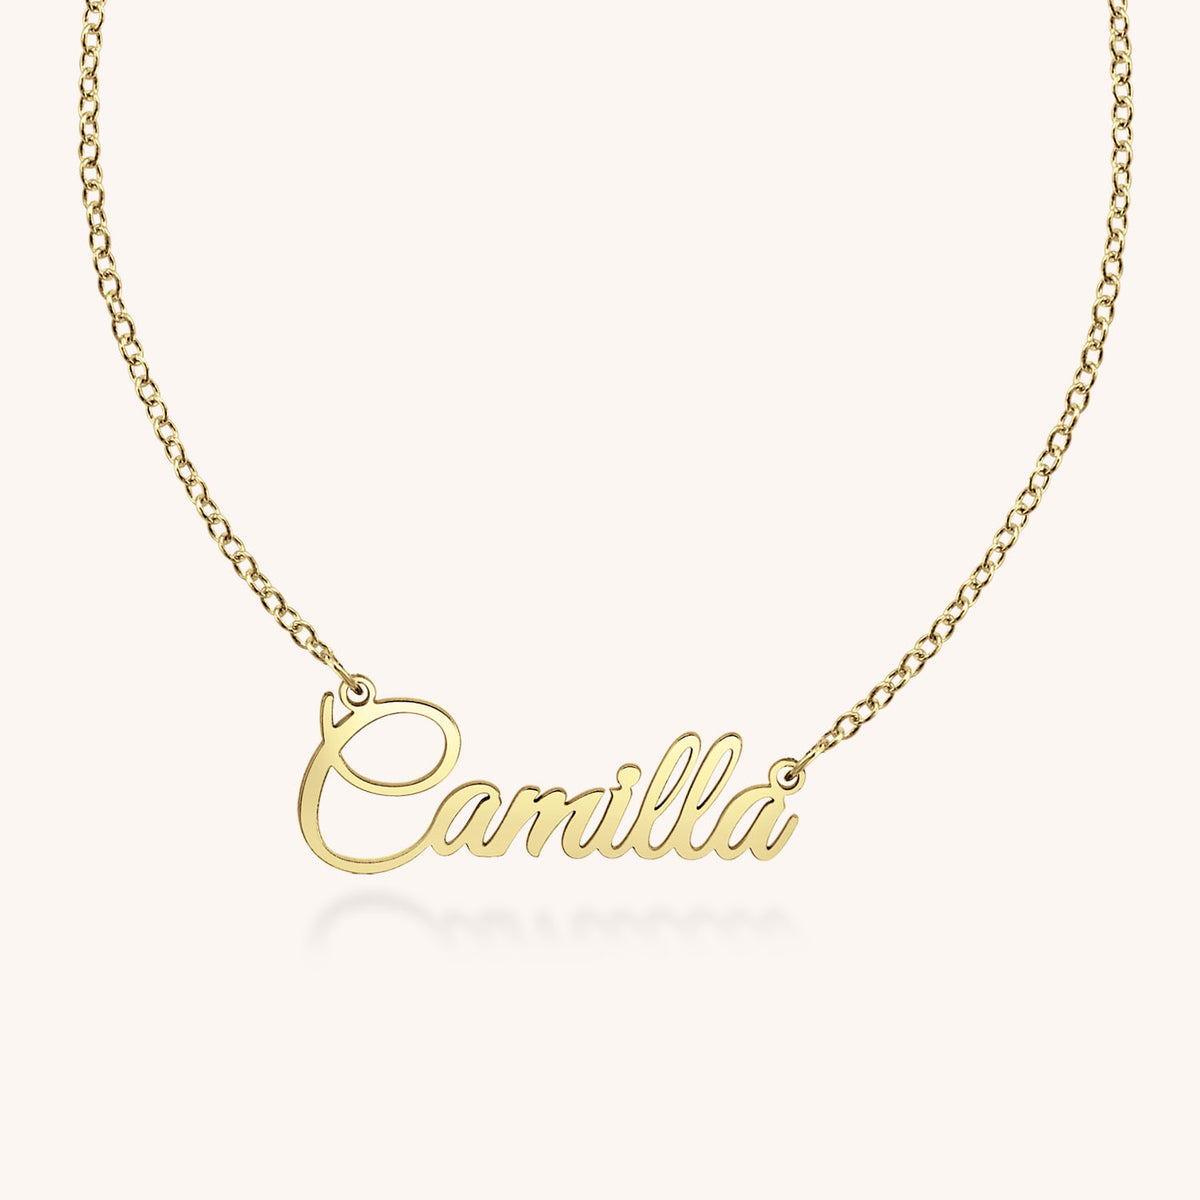 Camilla Nameplate Necklace